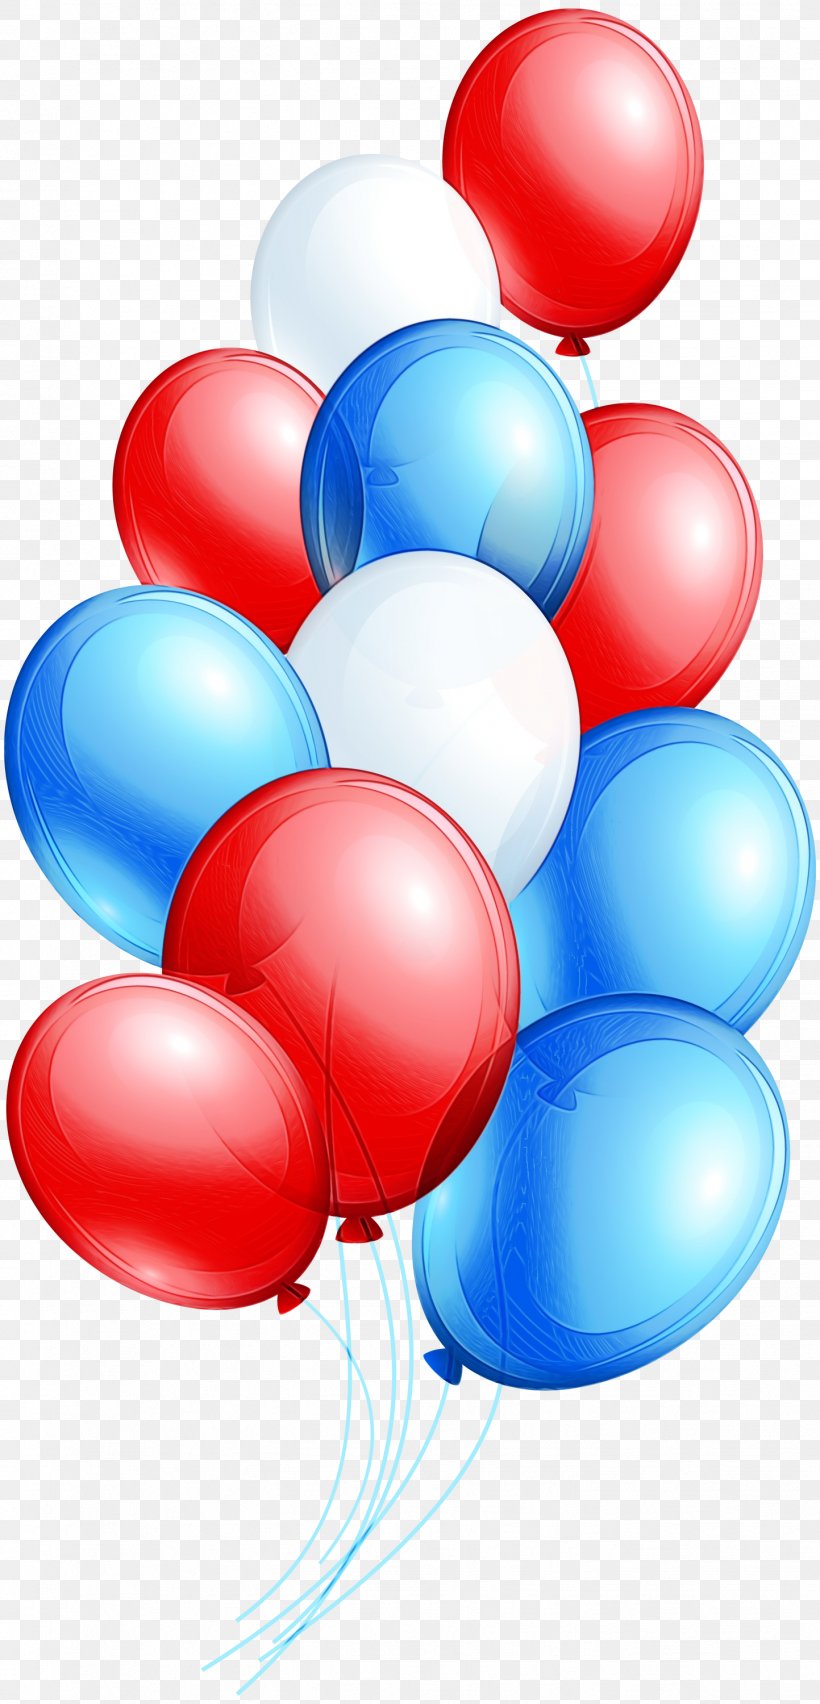 Blue Balloons Clip Art Image, PNG, 1443x3000px, Balloon, Blue, Blue Balloons, Bunch O Balloons, Independence Day Download Free